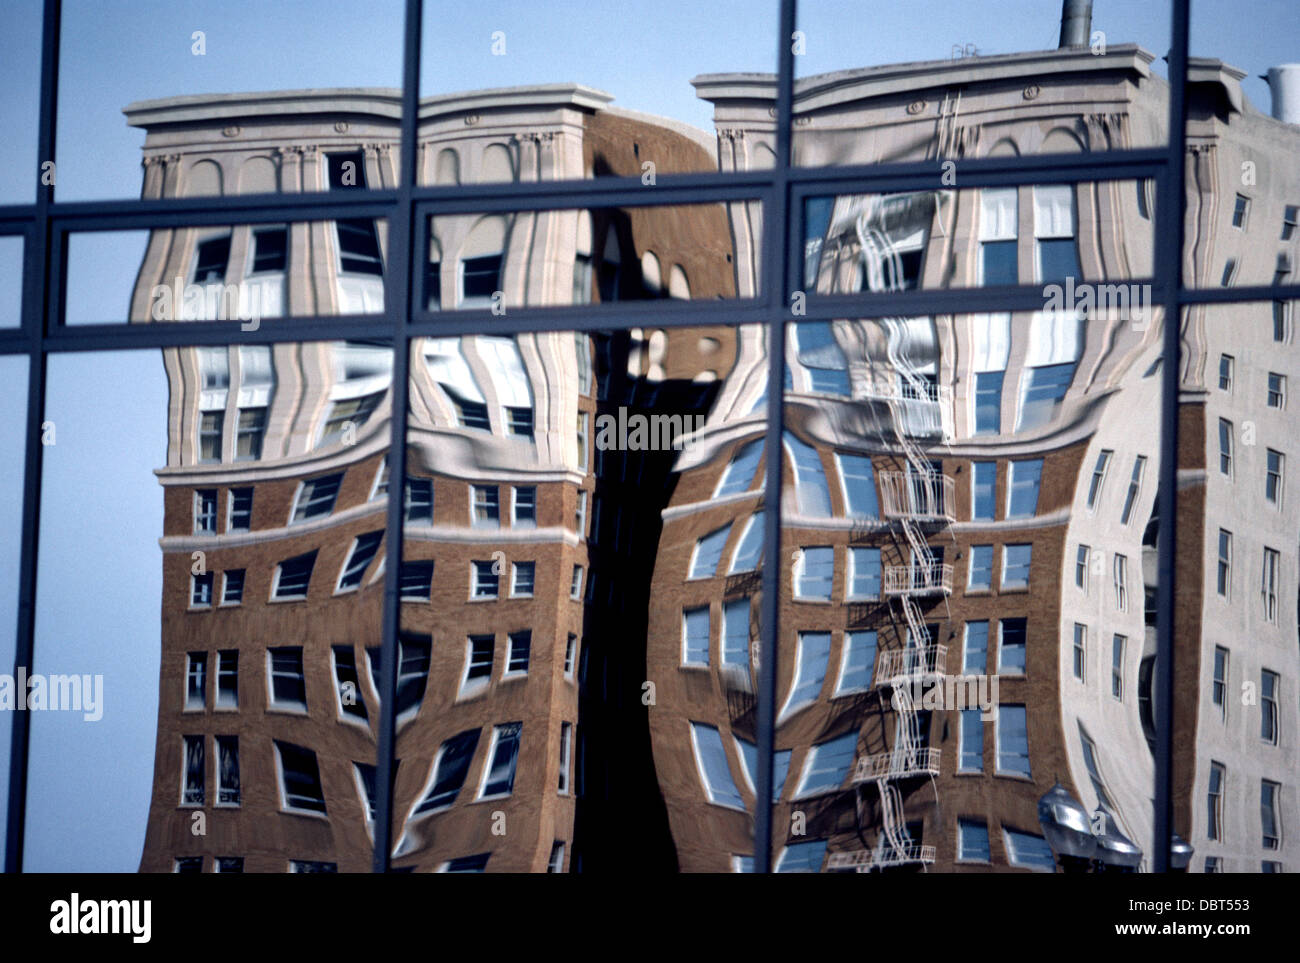 Two old brick buildings in downtown Long Beach, California, are reflected in the wavy glass windows of a modern office tower. Stock Photo